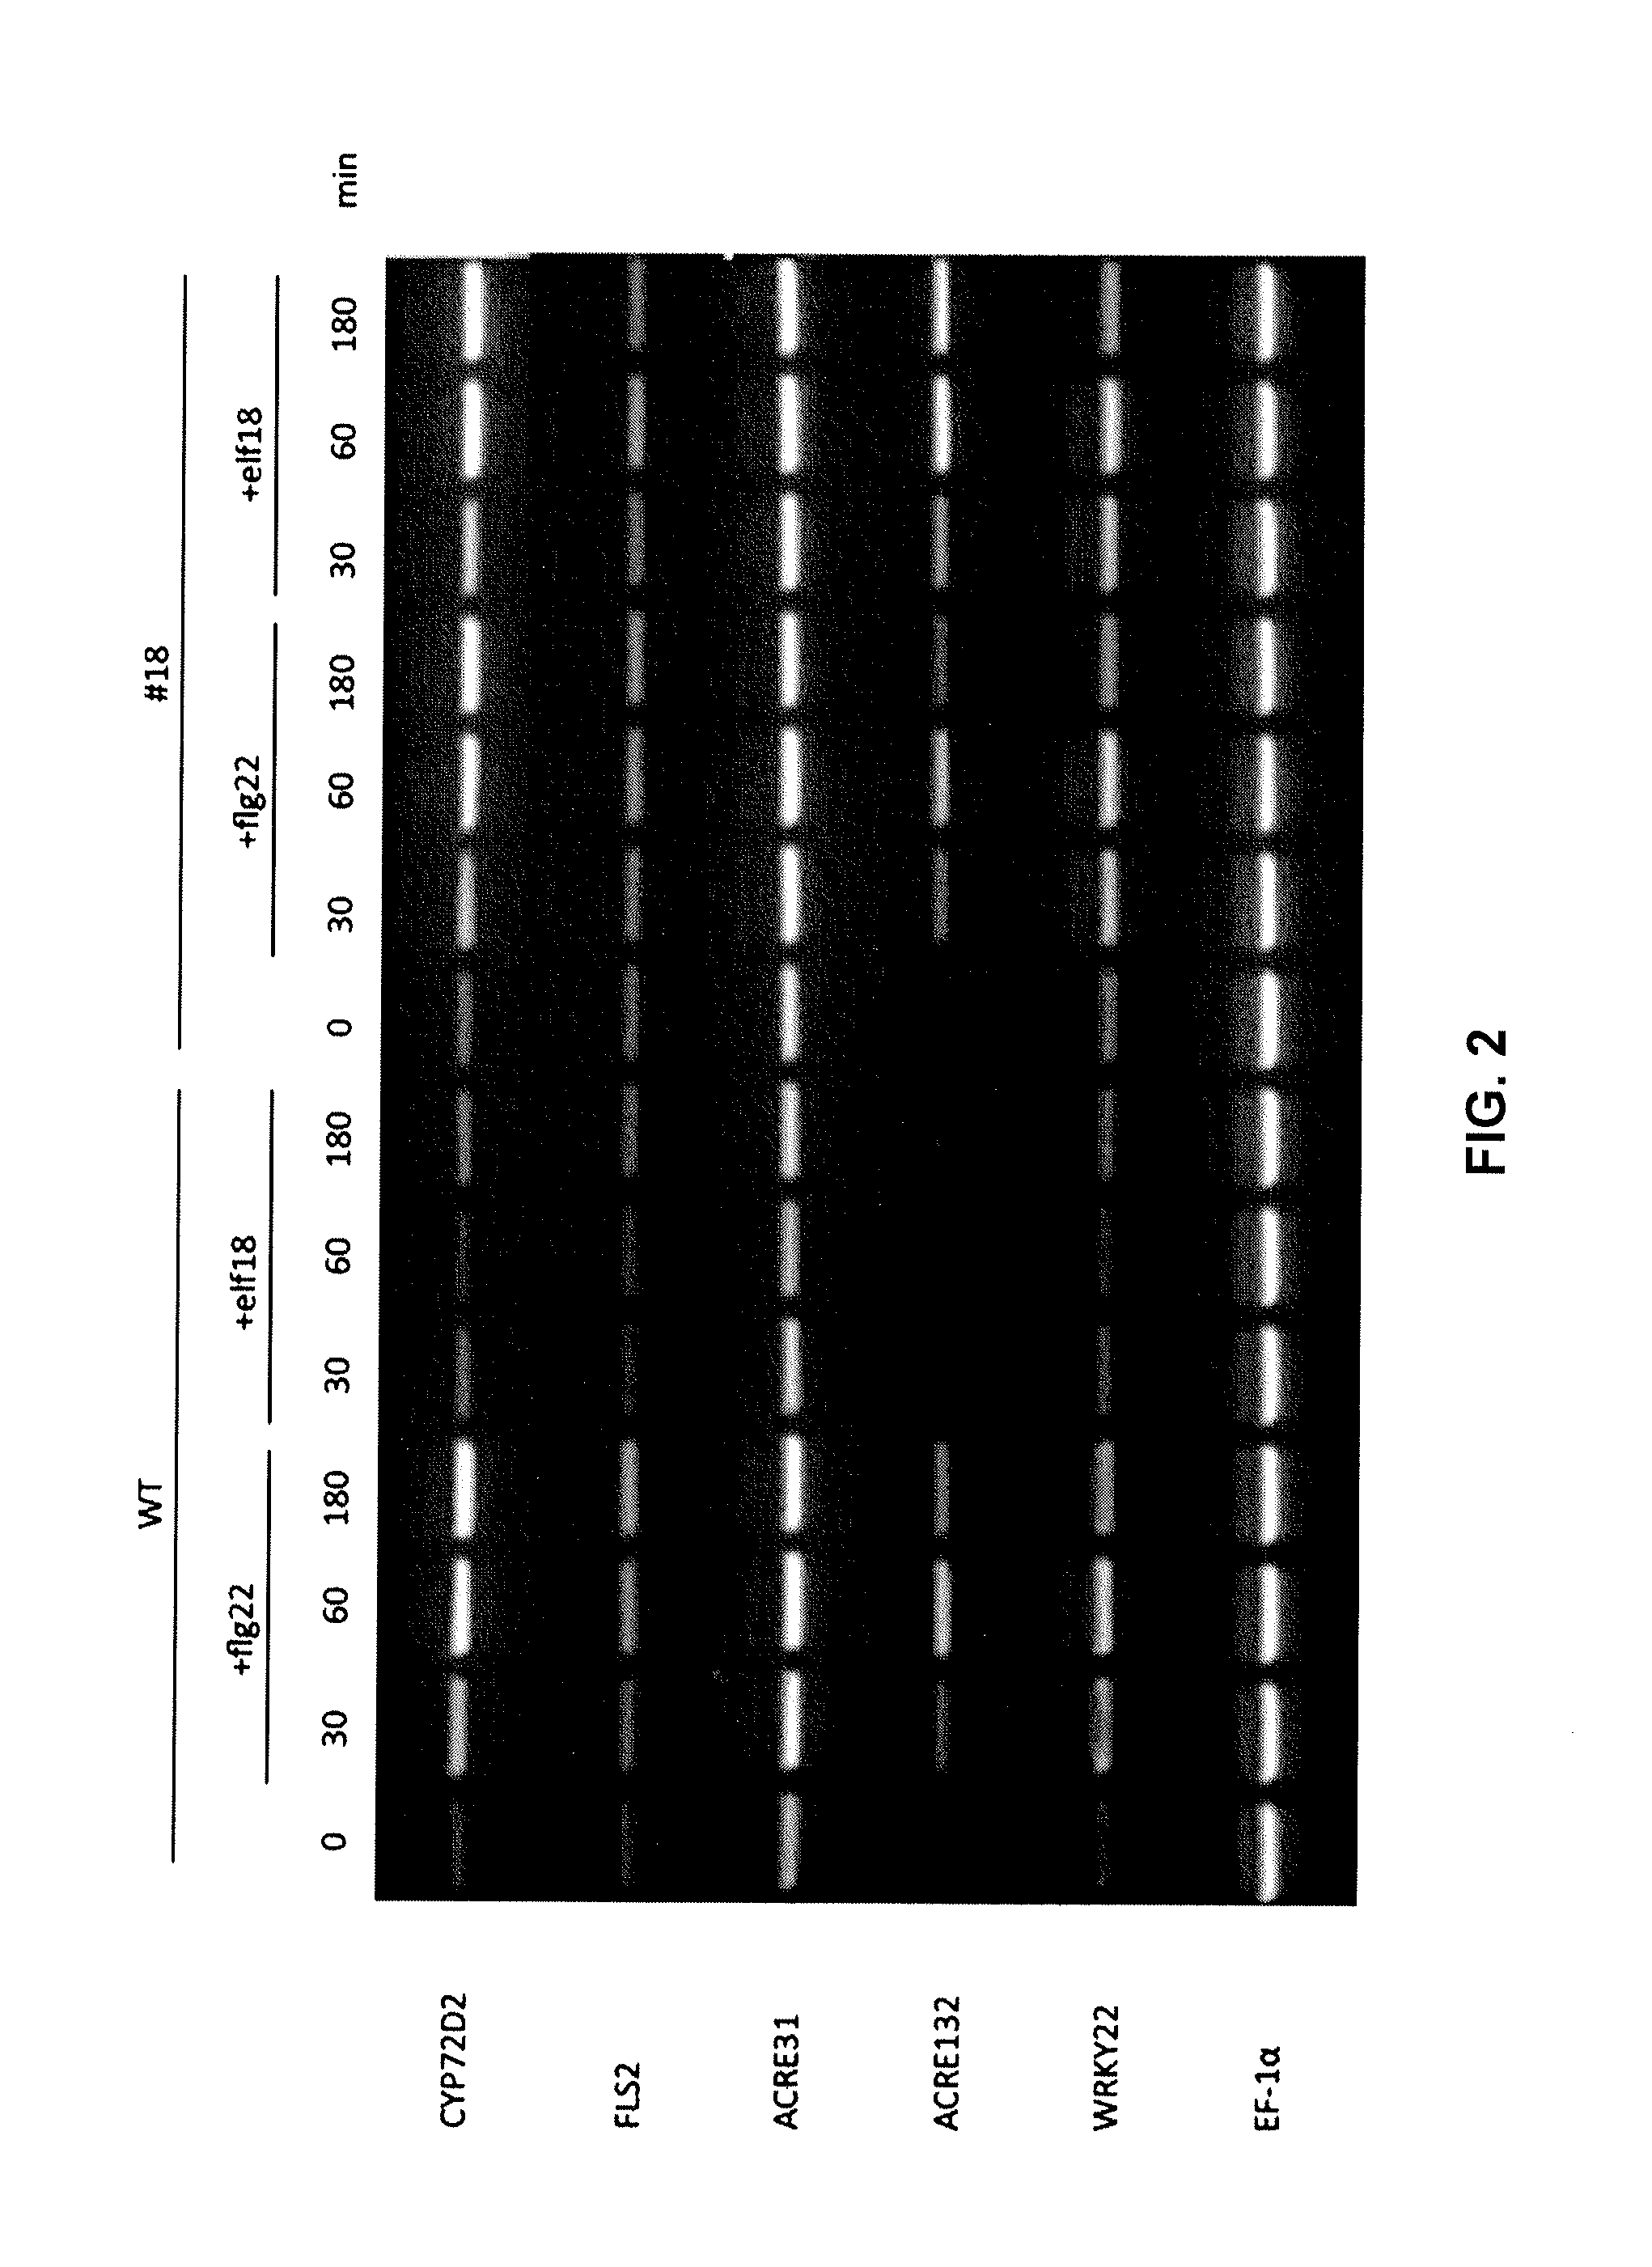 Methods of enhancing the resistance of plants to bacterial pathogens